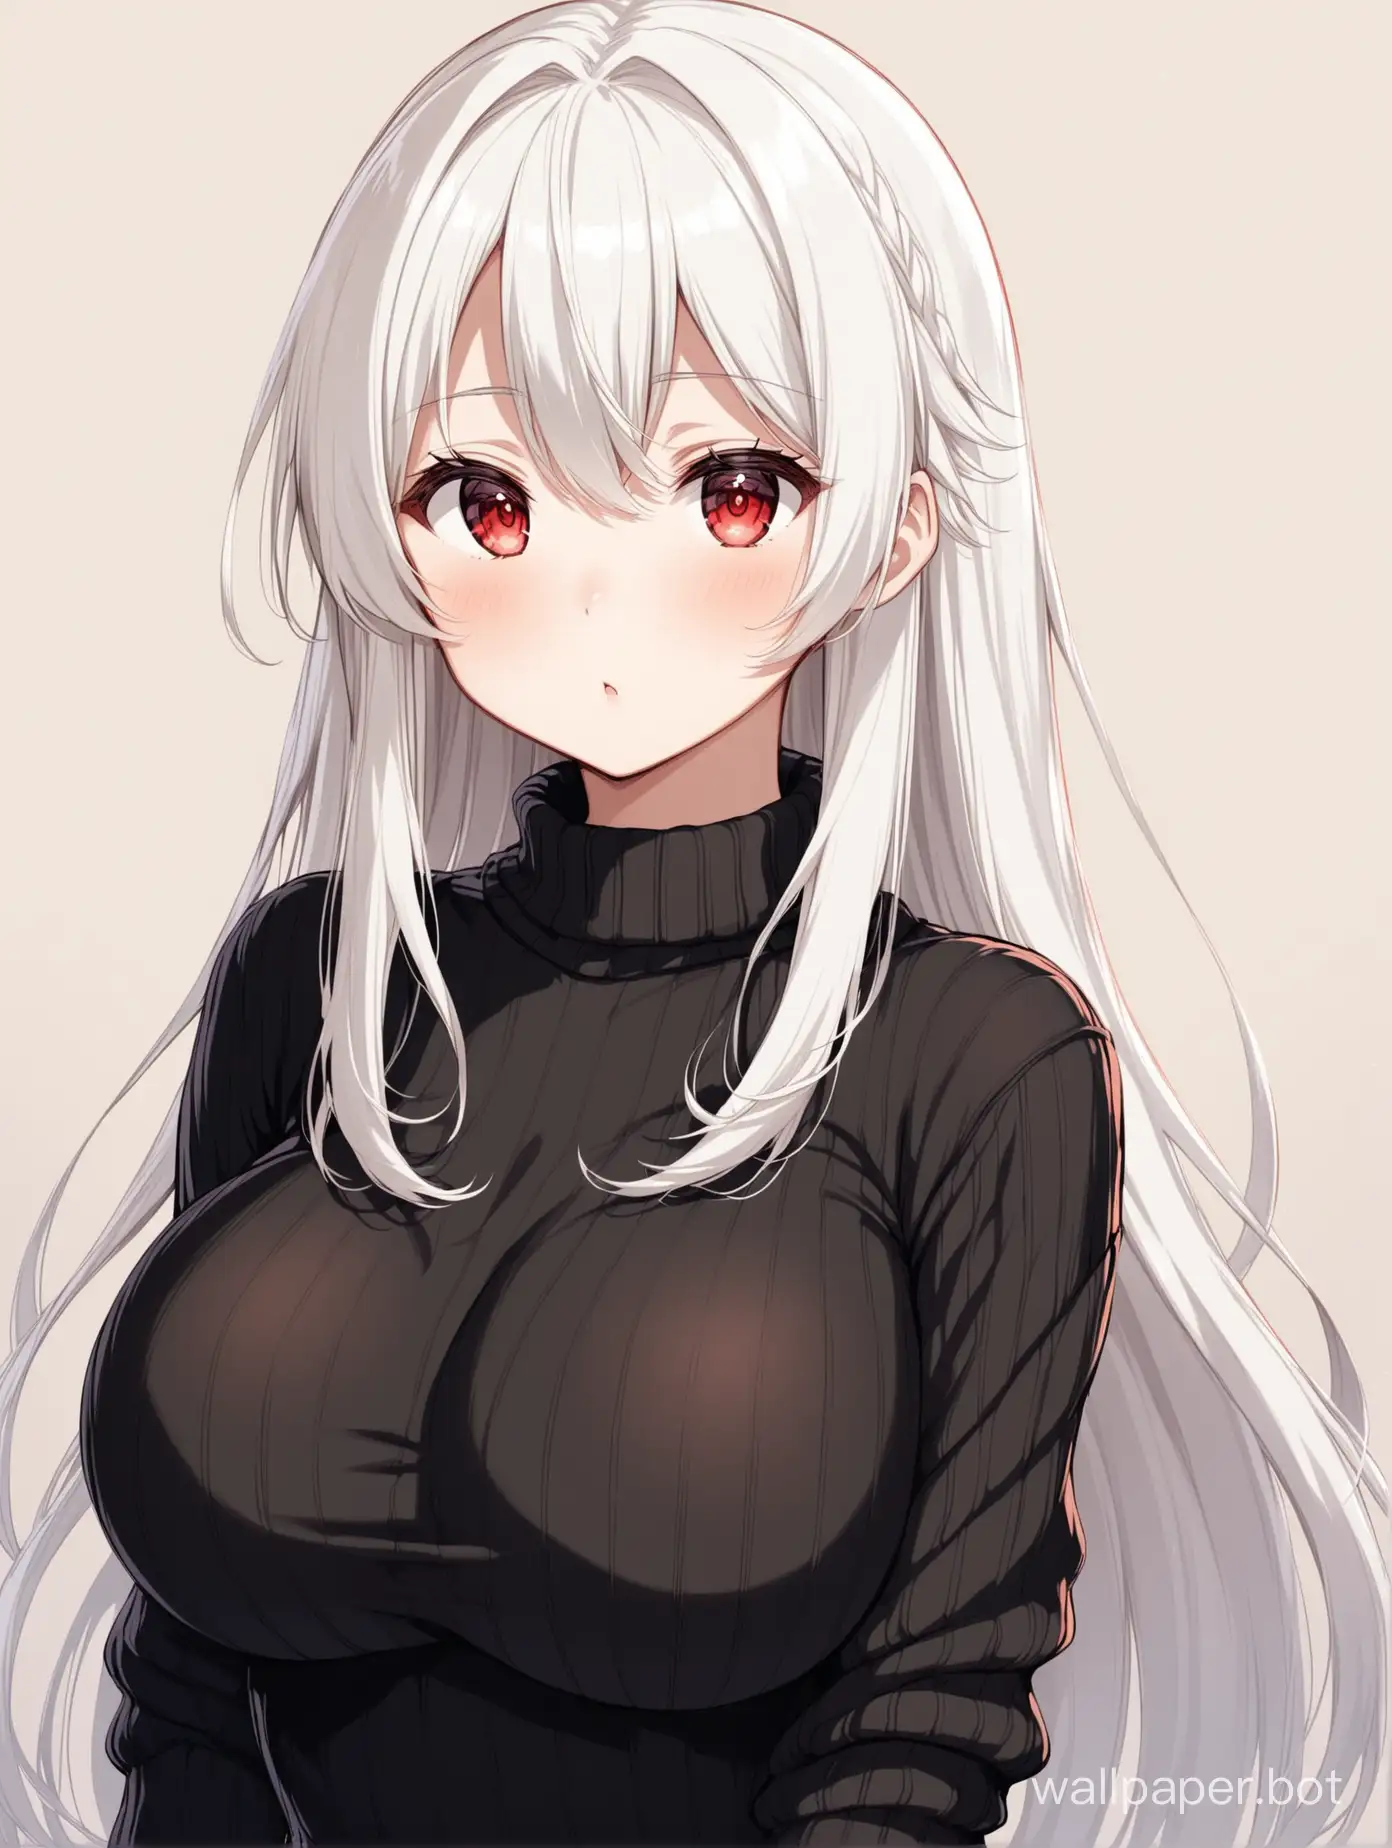 Adorable-Anime-Girl-with-White-Hair-and-Red-Eyes-Wearing-Black-Sweater